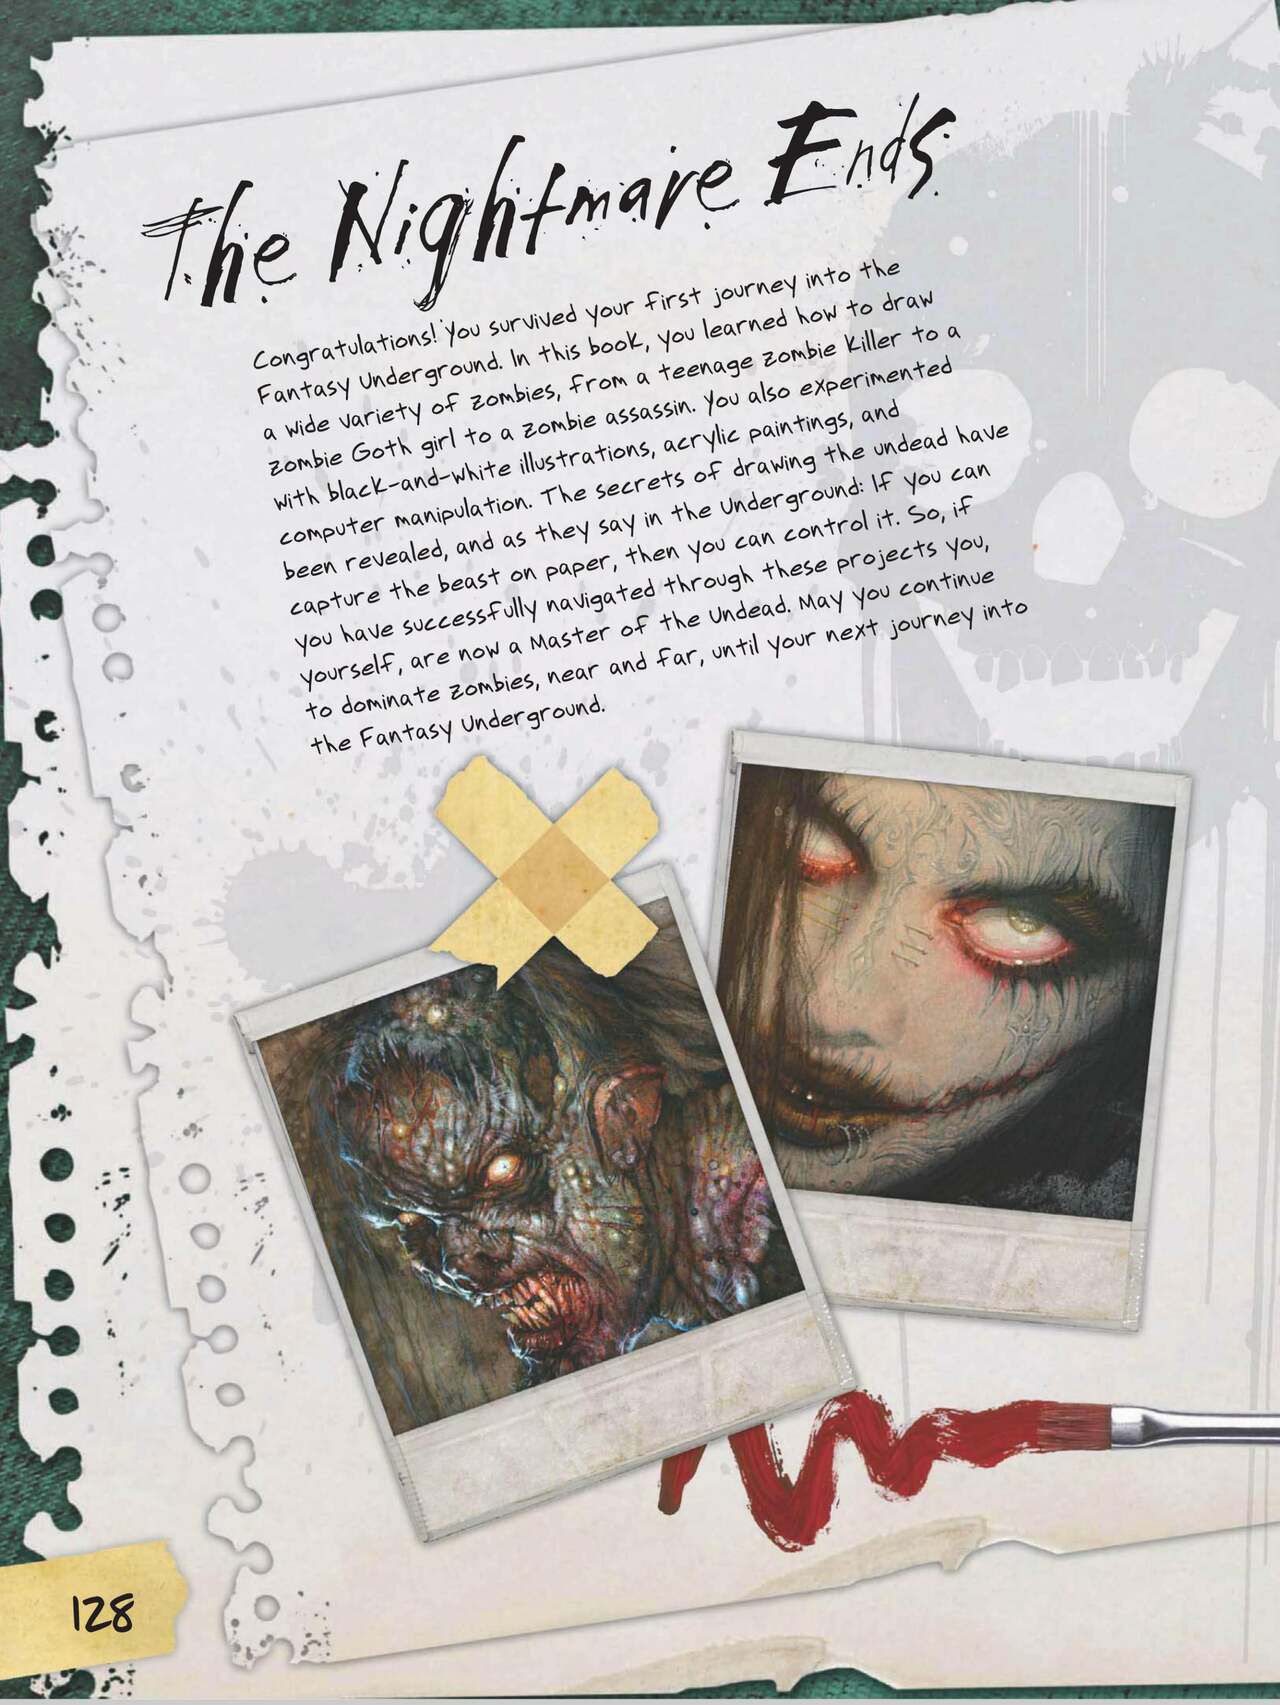 How to Draw Zombies: Discover the secrets to drawing, painting, and illustrating the undead 僵尸描绘集 129